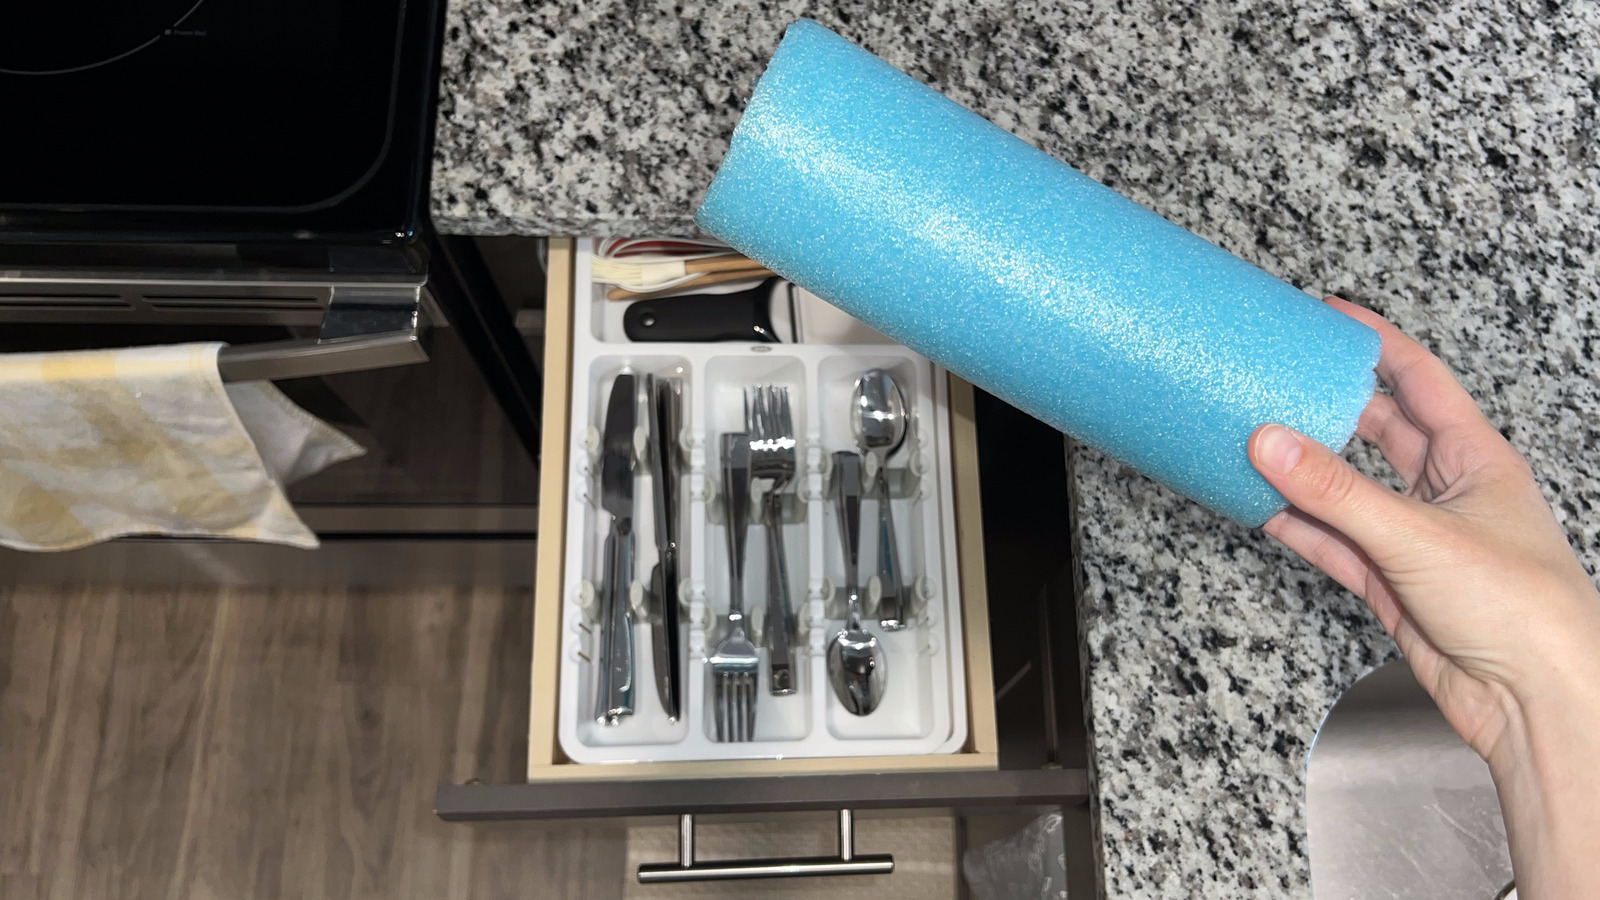 We Tried The Pool Noodle Hack To Keep Drawer Organizers In Place And ...